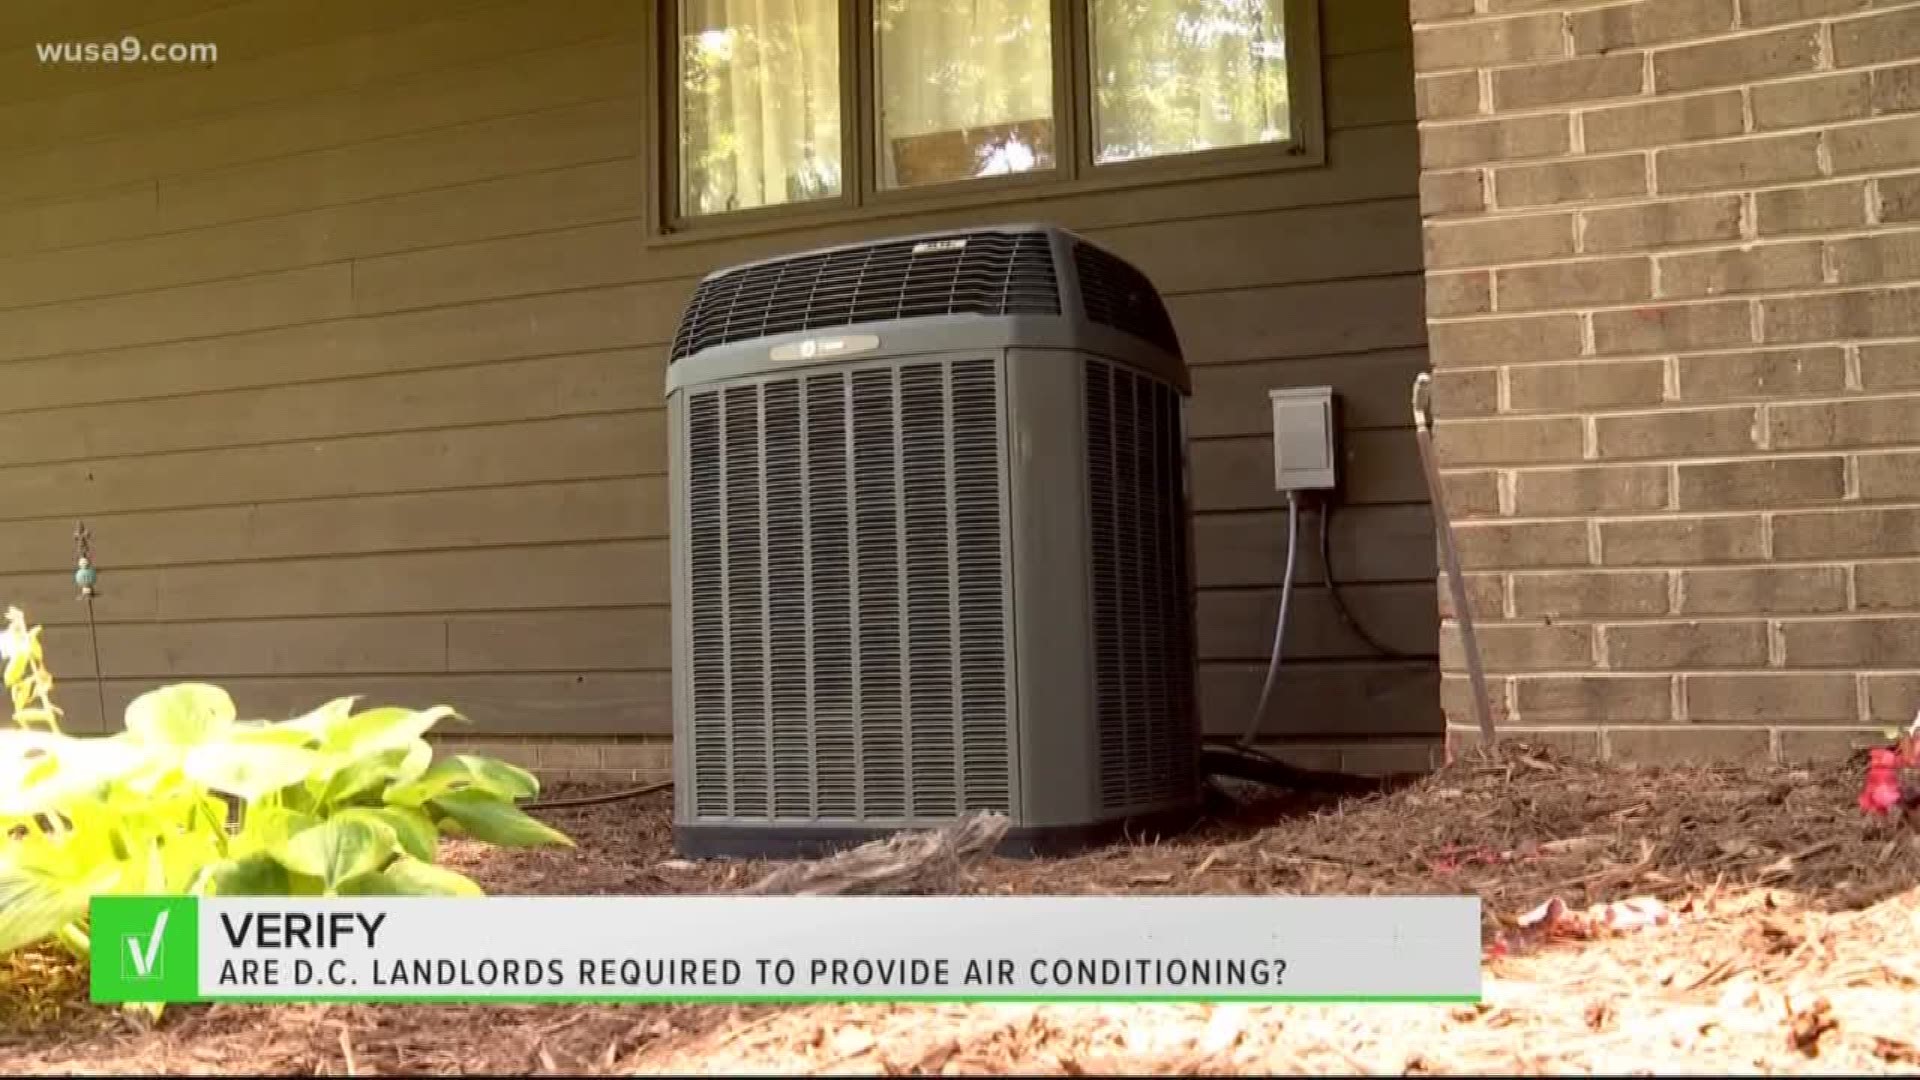 However, if the apartment already has A/C, the landlord is responsible for maintaining it at a reasonable temperature, and having it inspected each year.